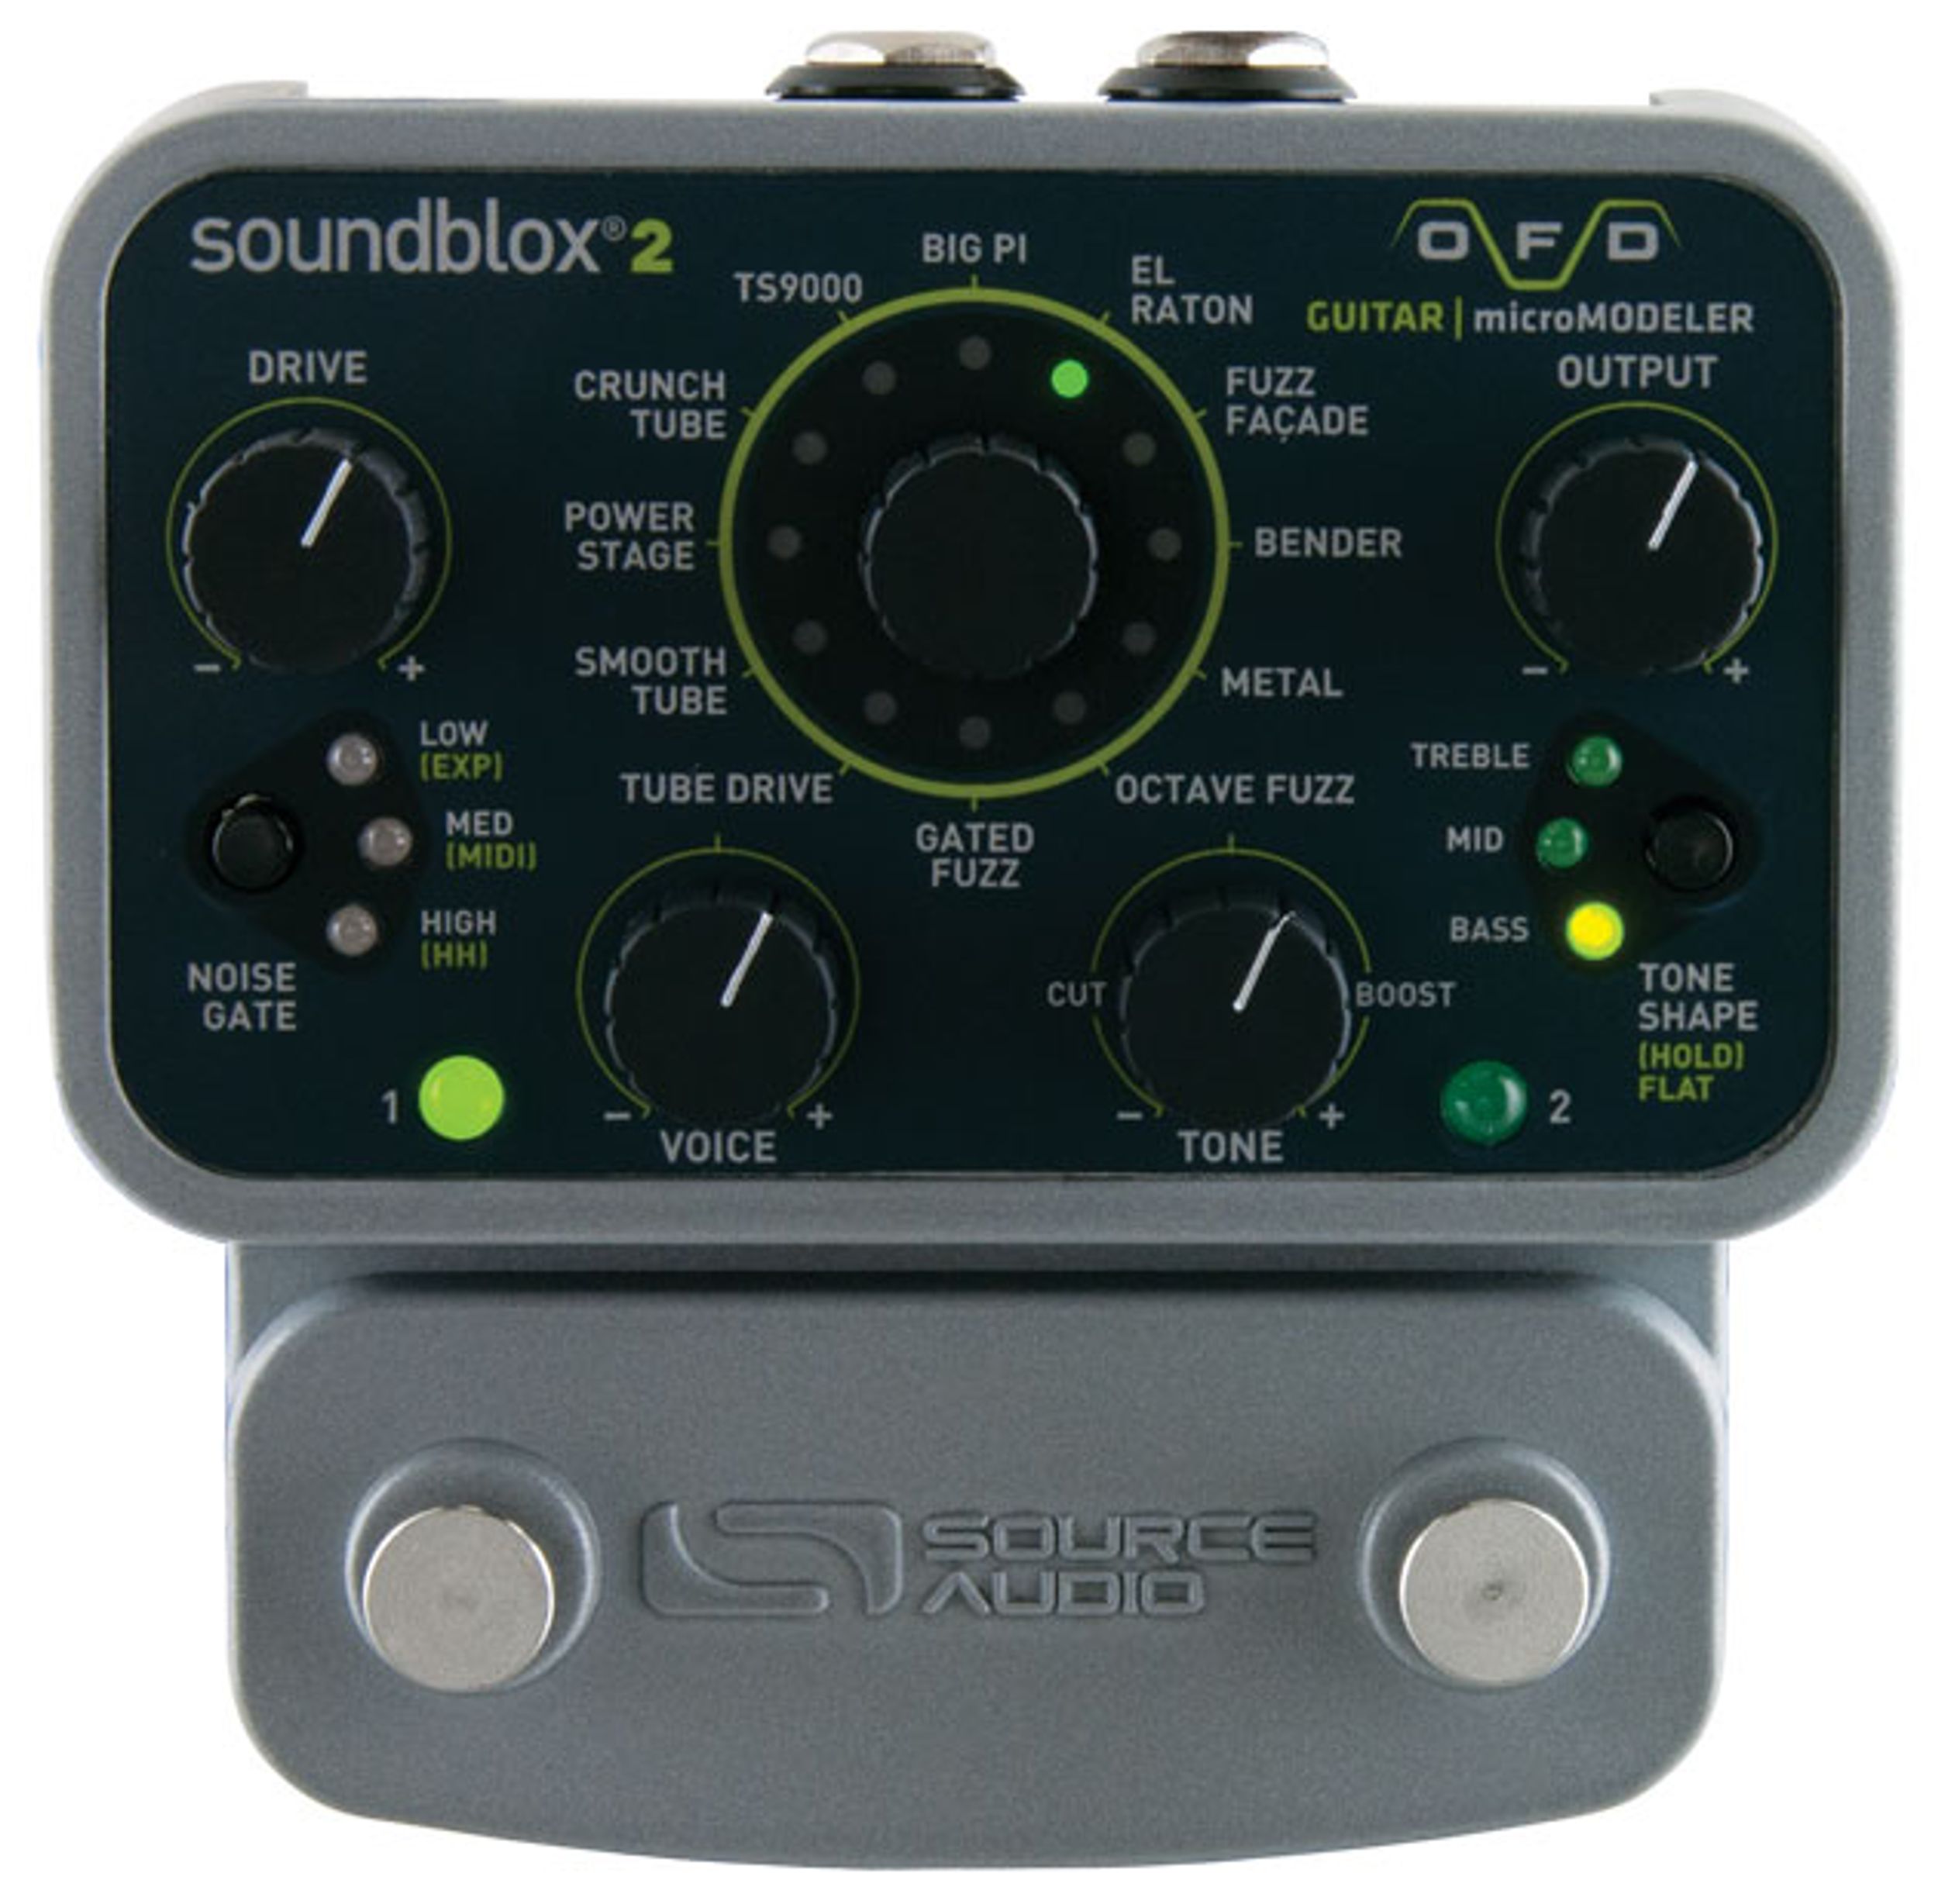 Source Audio OFD Guitar microModeler Review